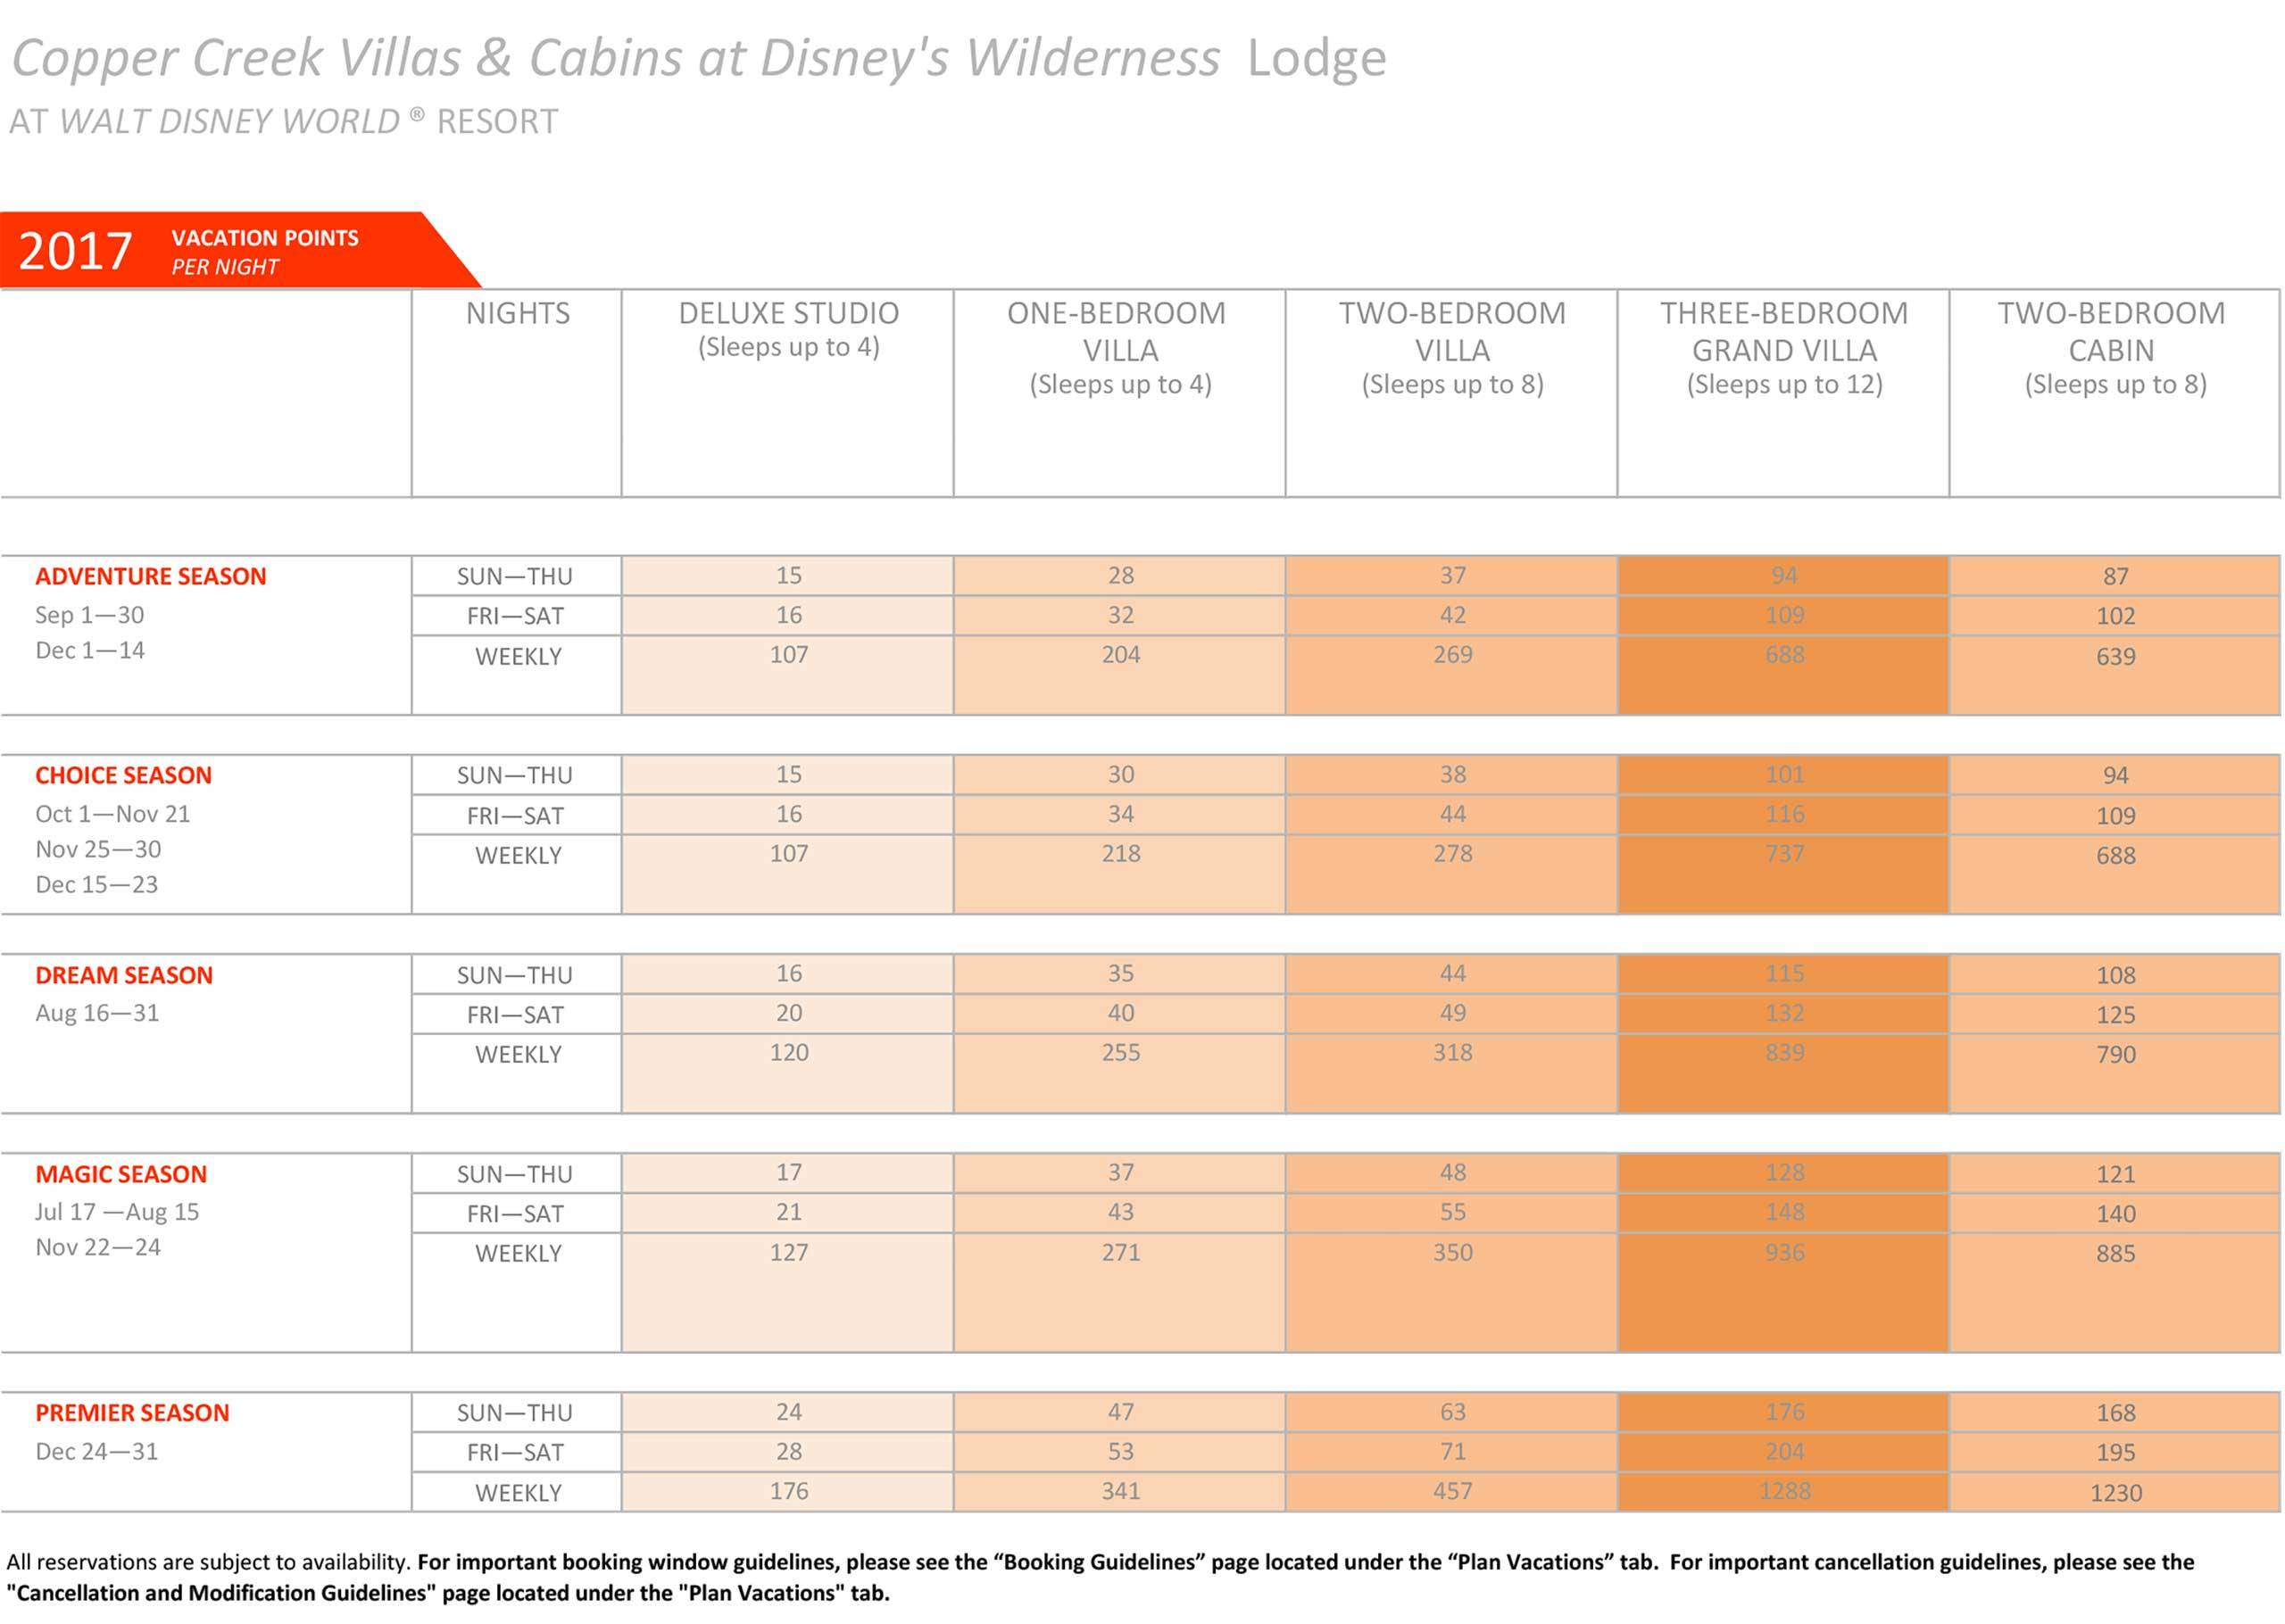 Copper Creek Villas and Cabins at Disney's Wilderness Lodge DVC points chart